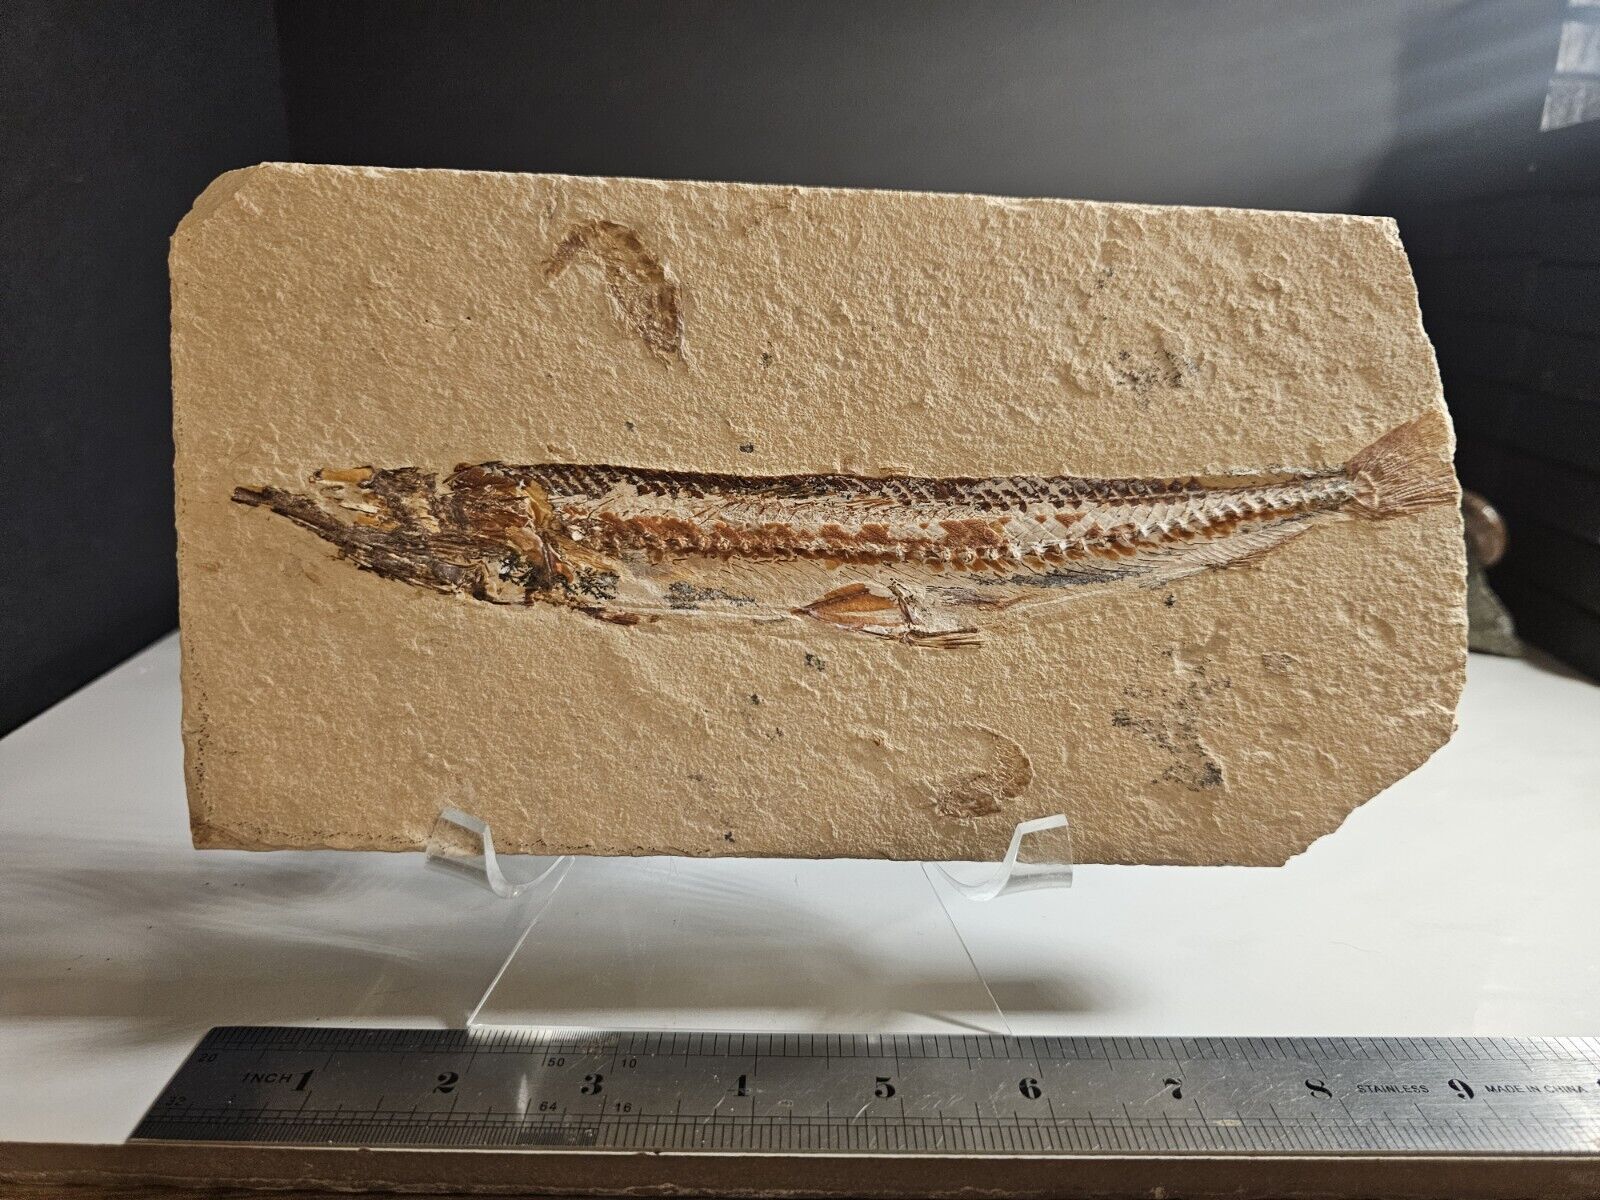 Prionolepis Fossil Viper Fish (Lebanon) - With Two Fossil Shrimp